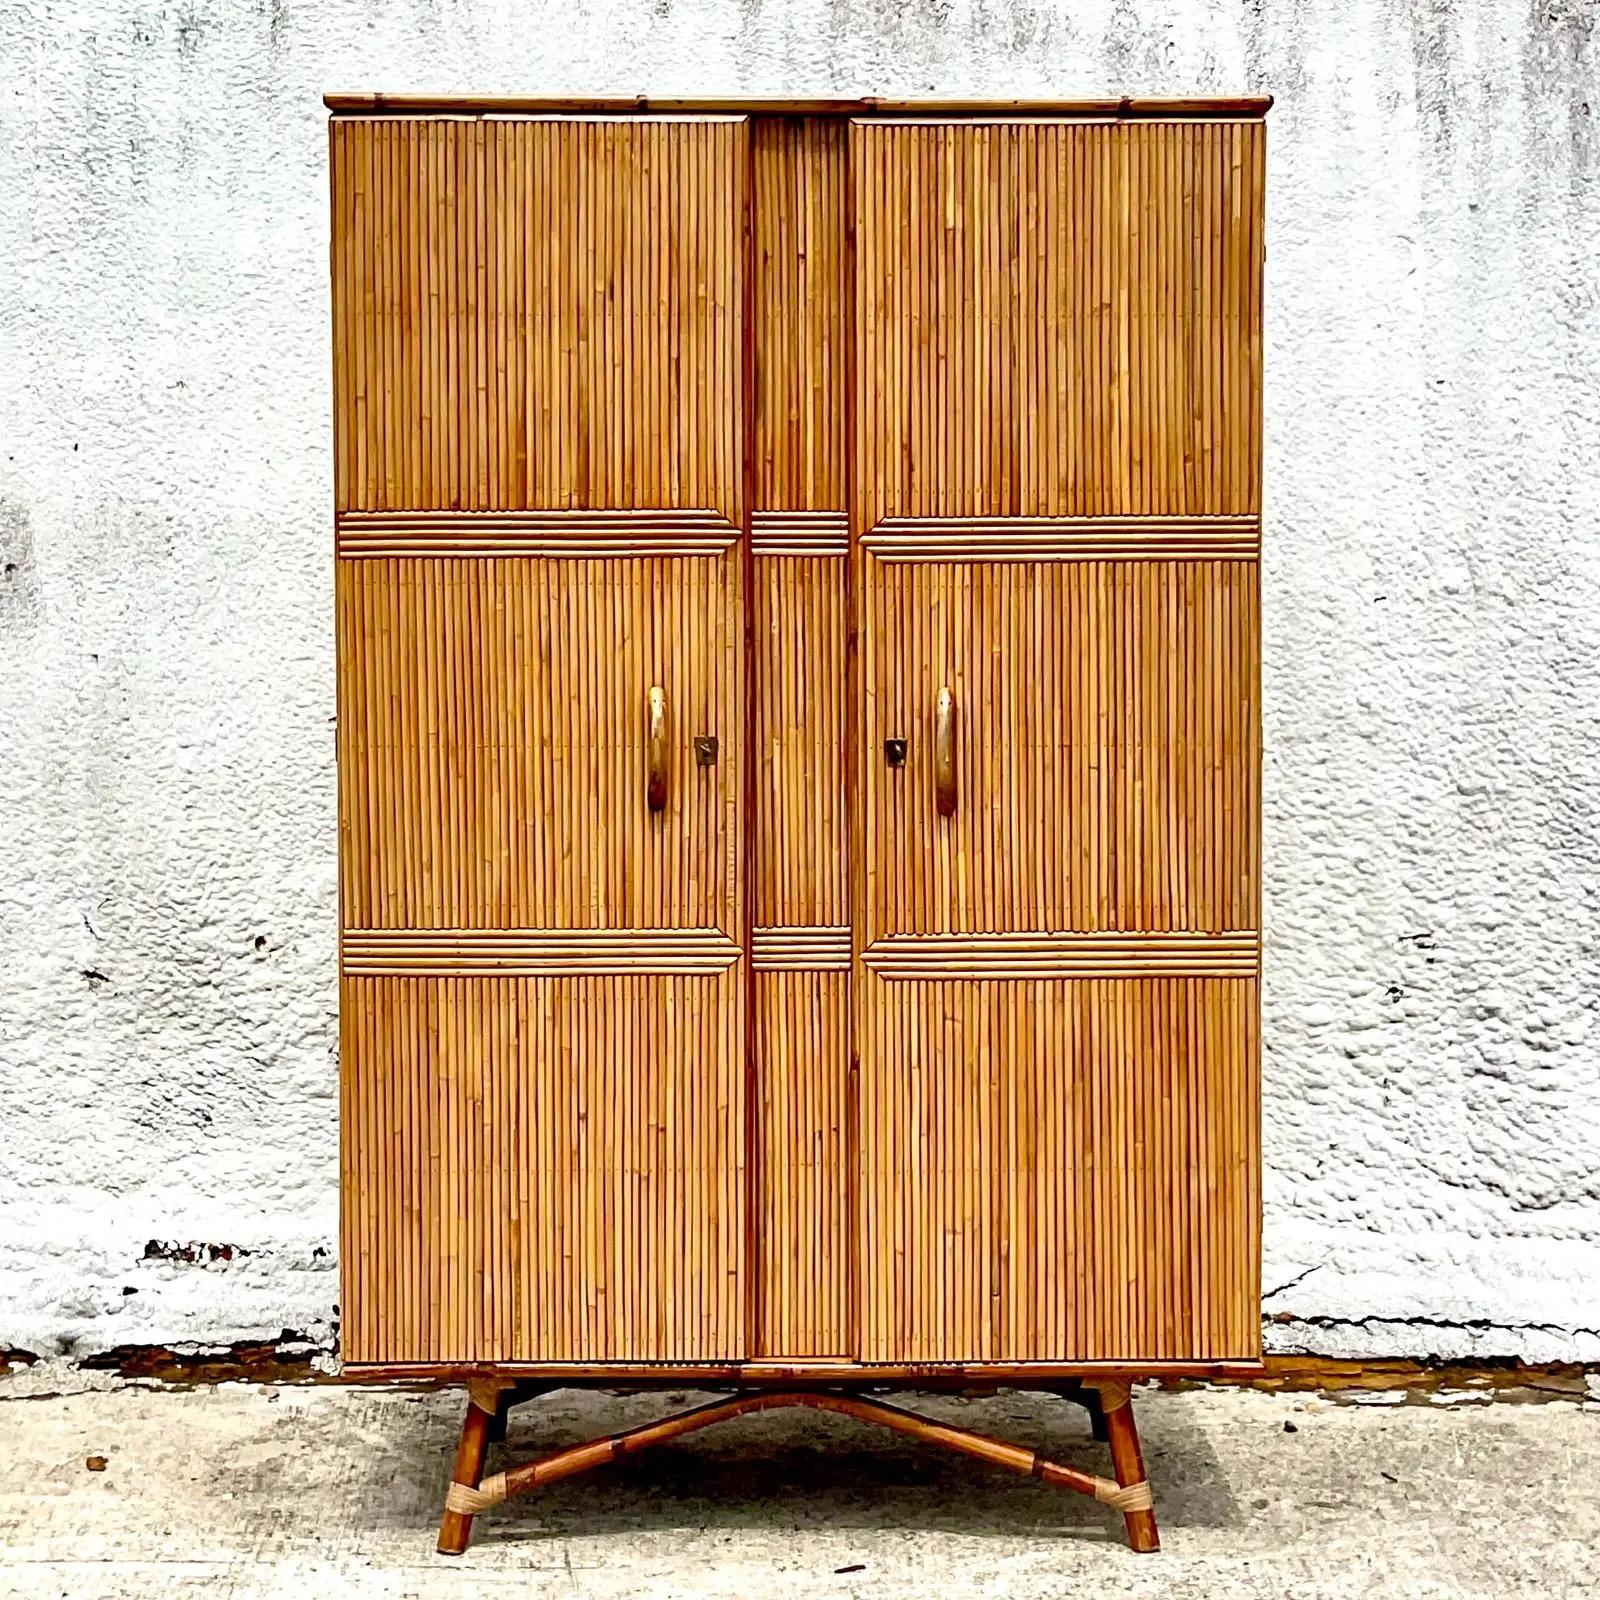 Fantastic vintage Coastal armoire. Incredible pencil reed cabinet with bent rattan base. Lots of great interior storage with shelving in one side and a front to back hang bar on the other side. Would be sensational if mirrored on the inside and